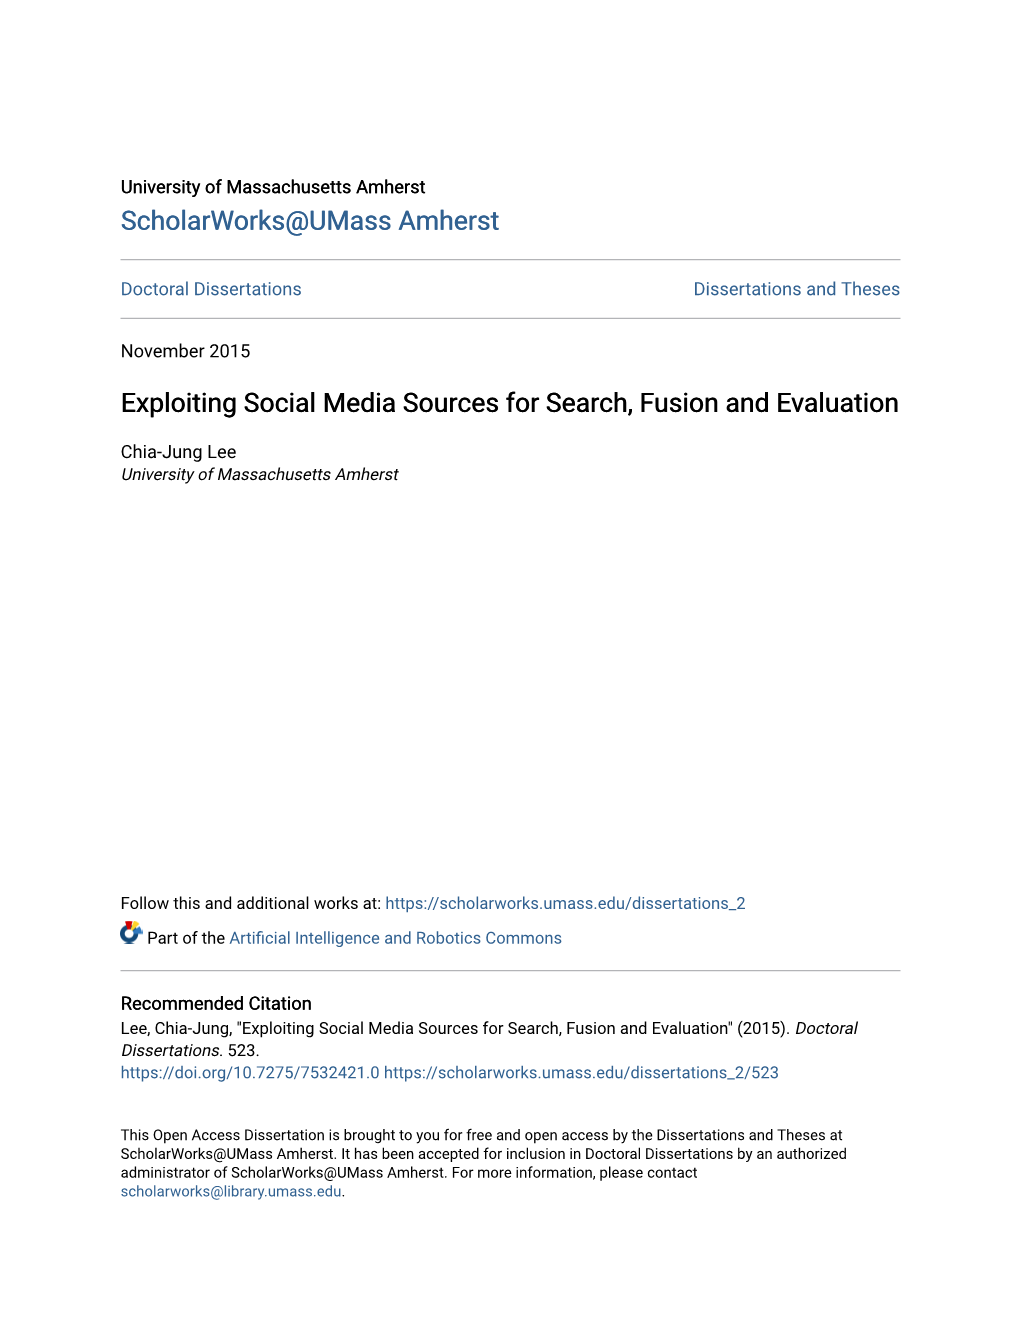 Exploiting Social Media Sources for Search, Fusion and Evaluation